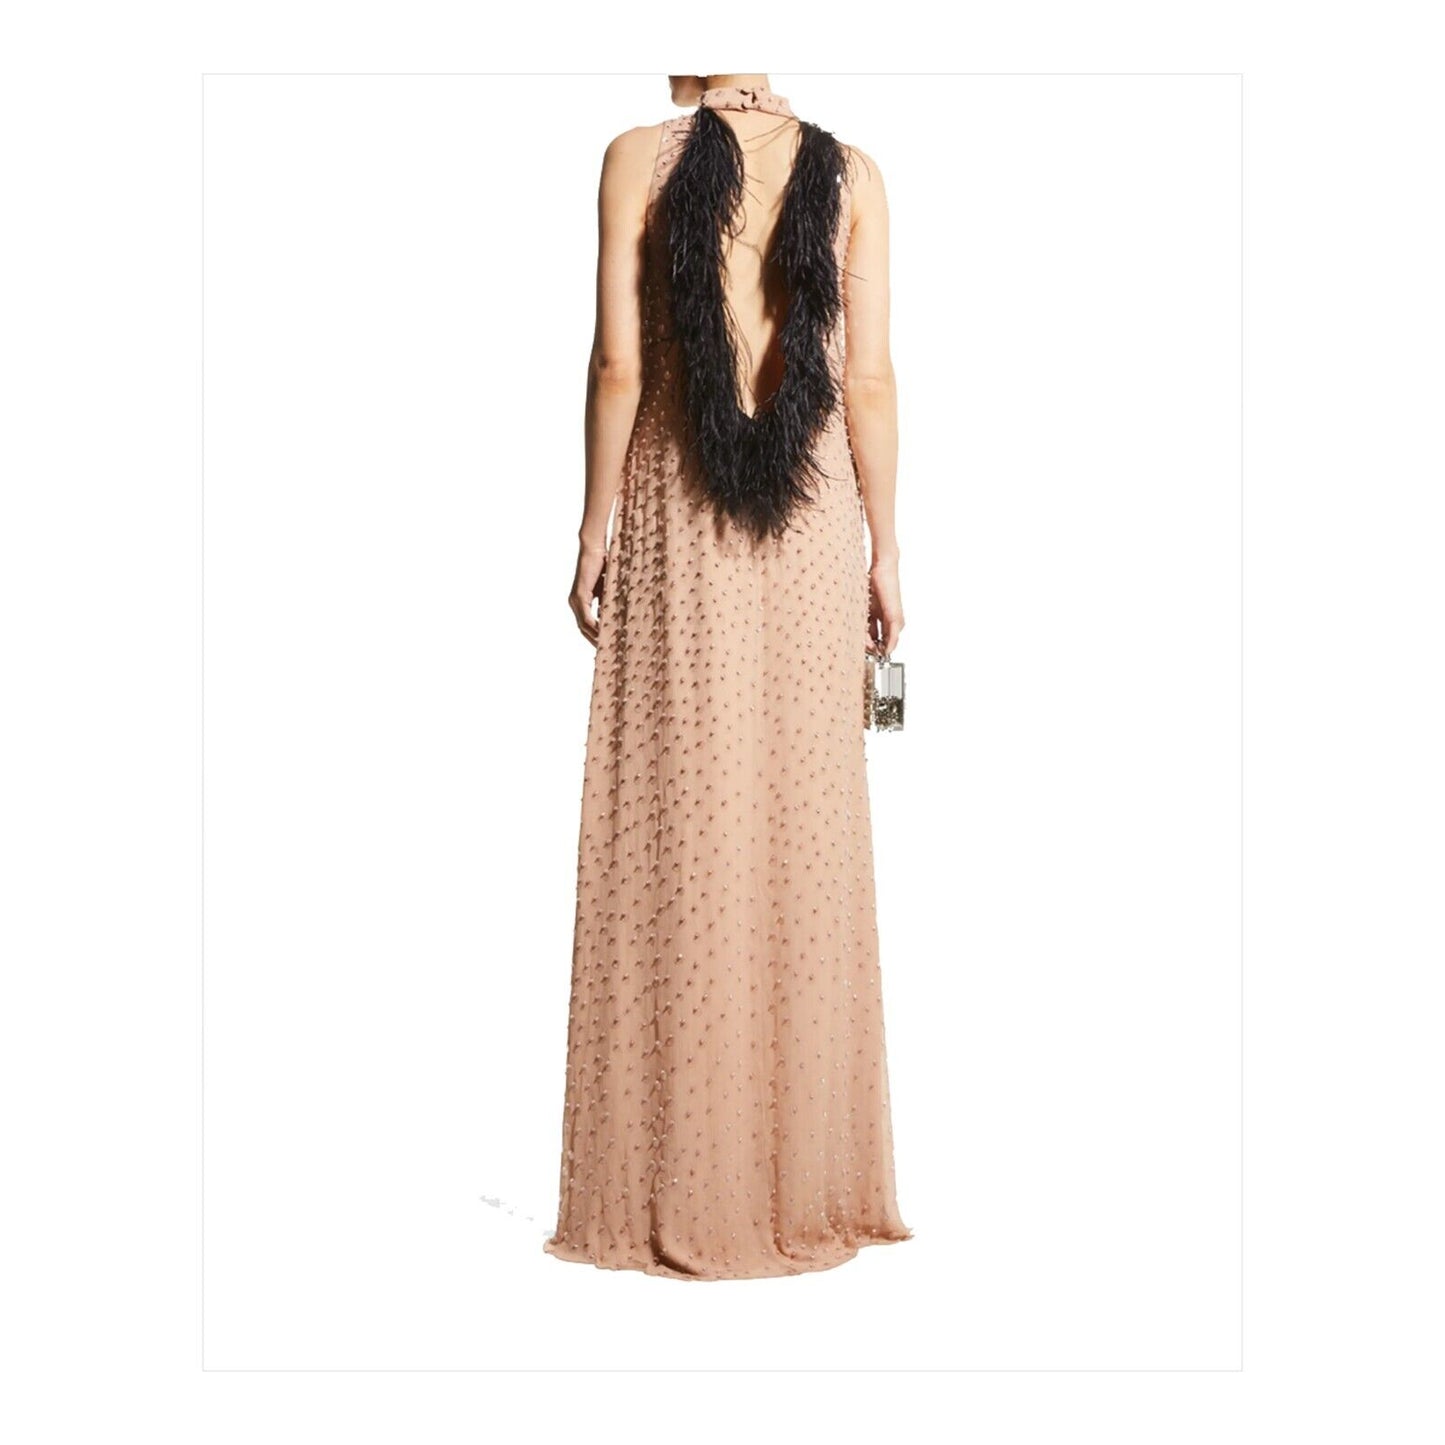 Alexis Kaza Blush Crystal Encrusted Feather Open Back Silk Gown XS NWT $3674